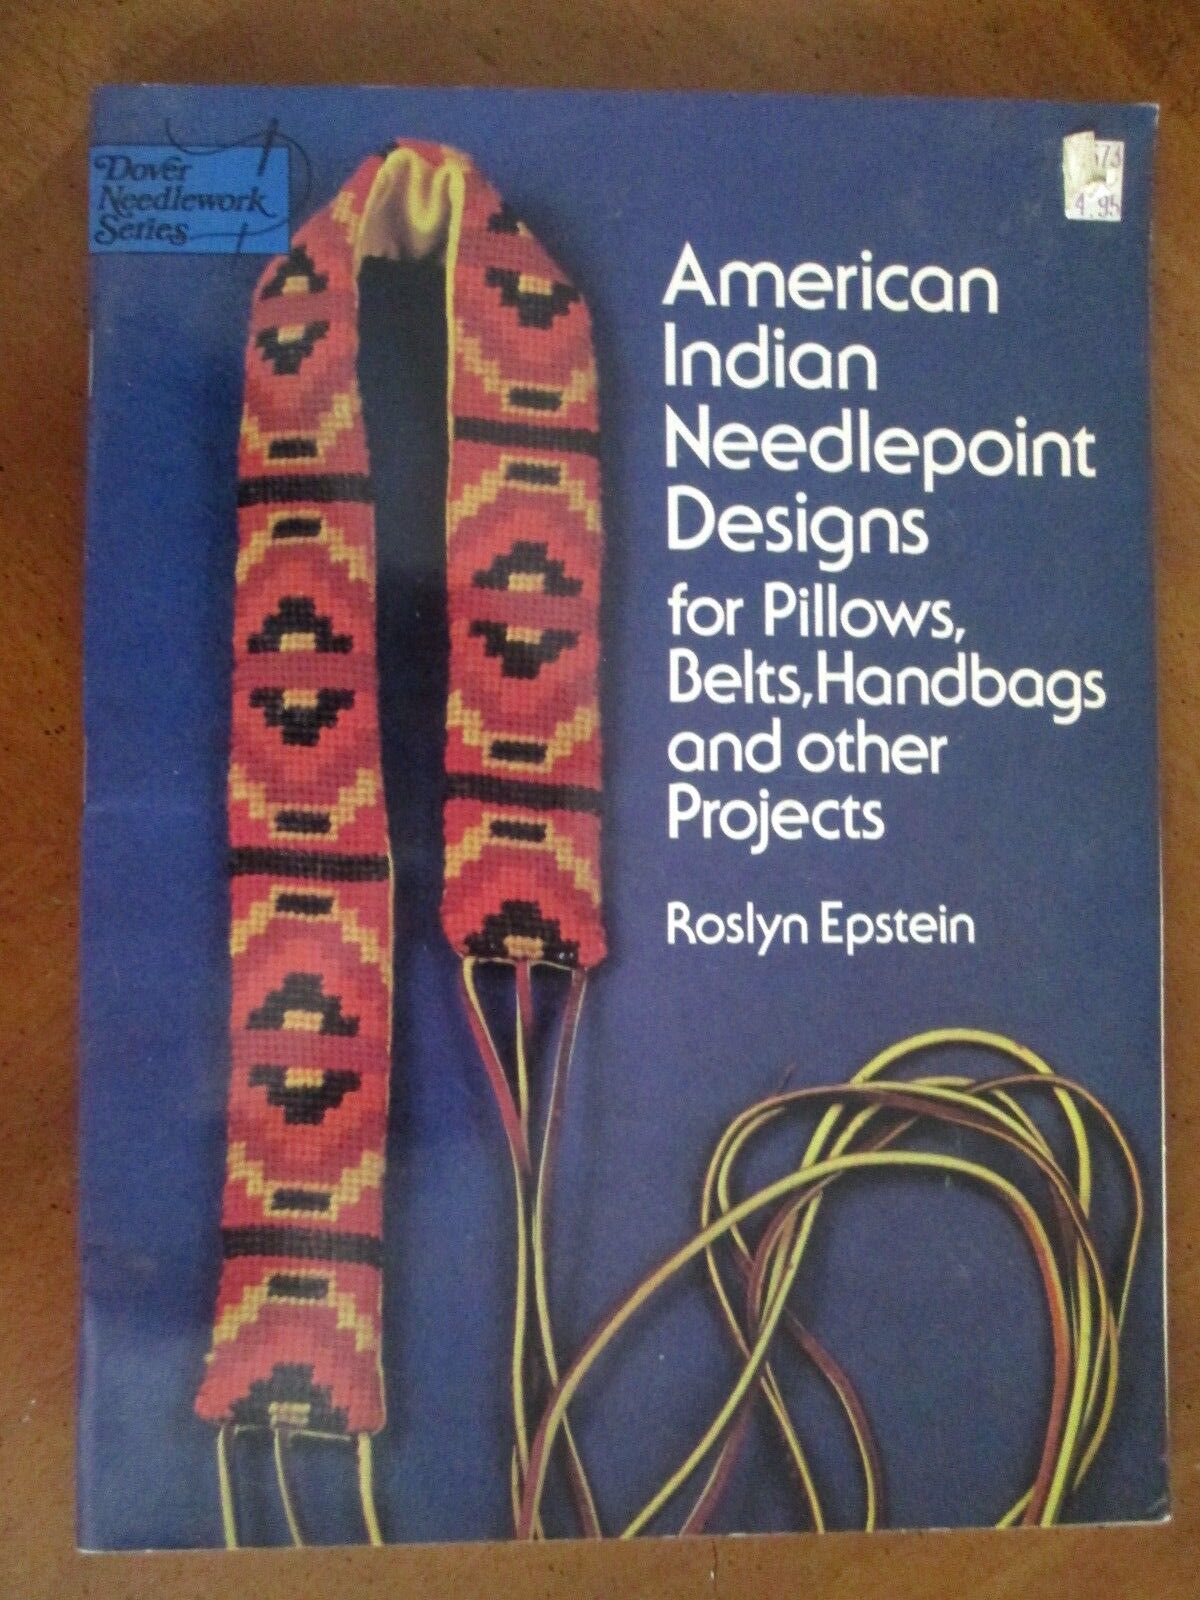 AMERICAN INDIAN NEEDLEPOINT DESIGNS for Pillows, Belts, Handbags + DOVER SC